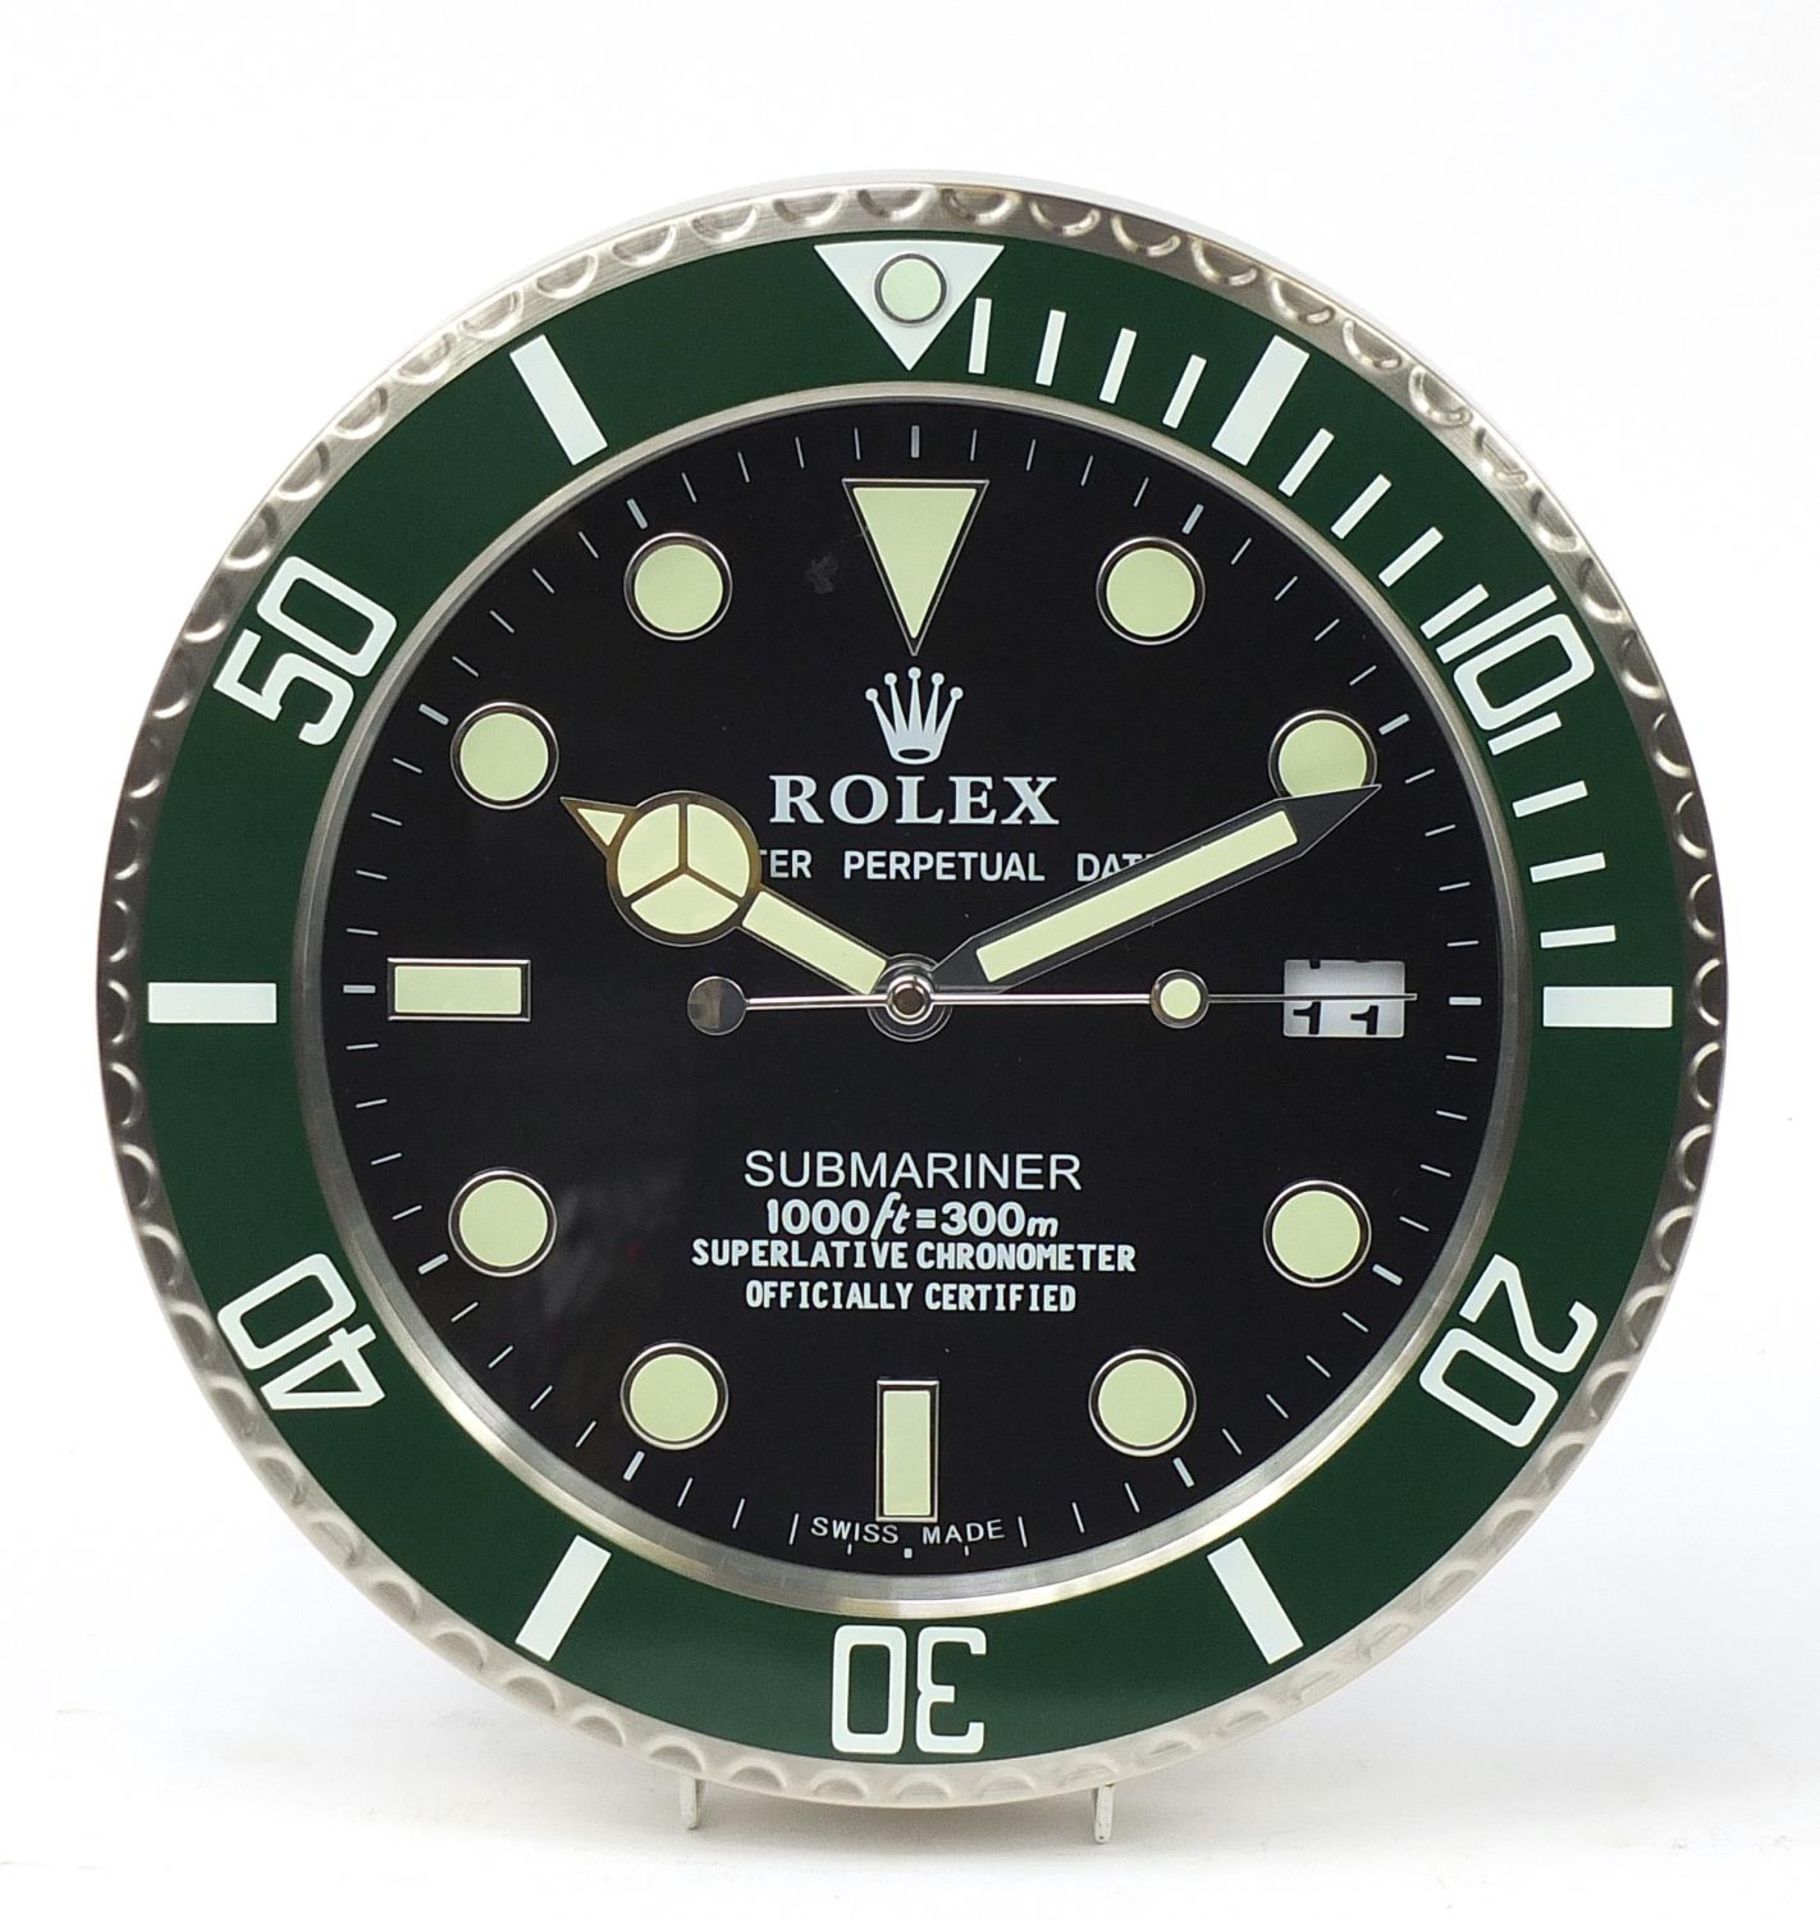 Rolex Submariner design dealers display wall clock, 34cm in diameter : For Further Condition Reports - Image 2 of 6